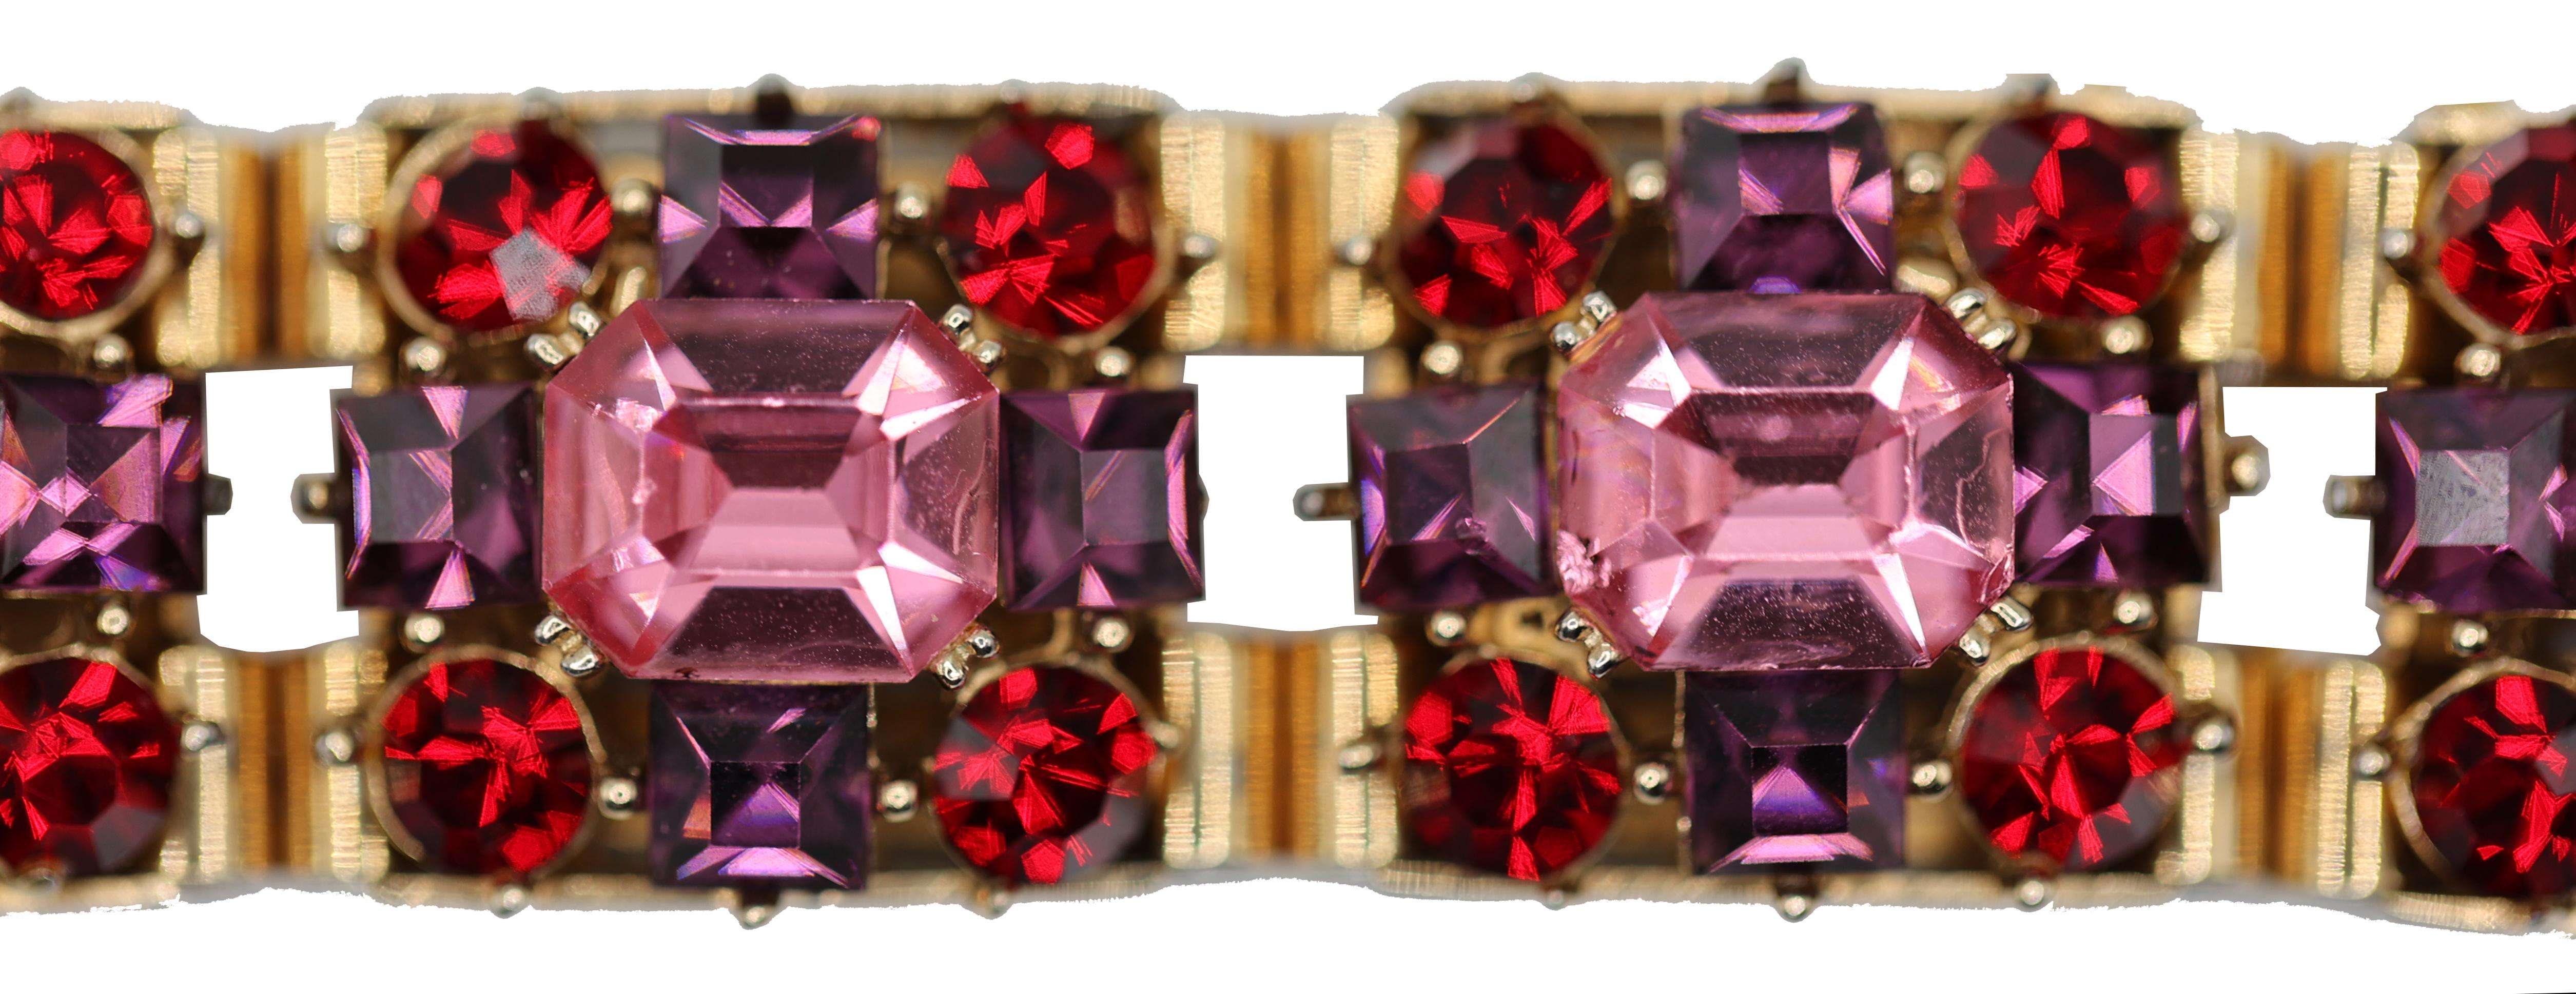 1950's Rare Austrian Crystal Collectible Bracelet

This stunning Austrian Crystal bracelet features 7 large deep pink emerald cut crystals surrounded each by 4 round ruby red crystals and 4 square cut amethyst color crystals. The 7 gold color links